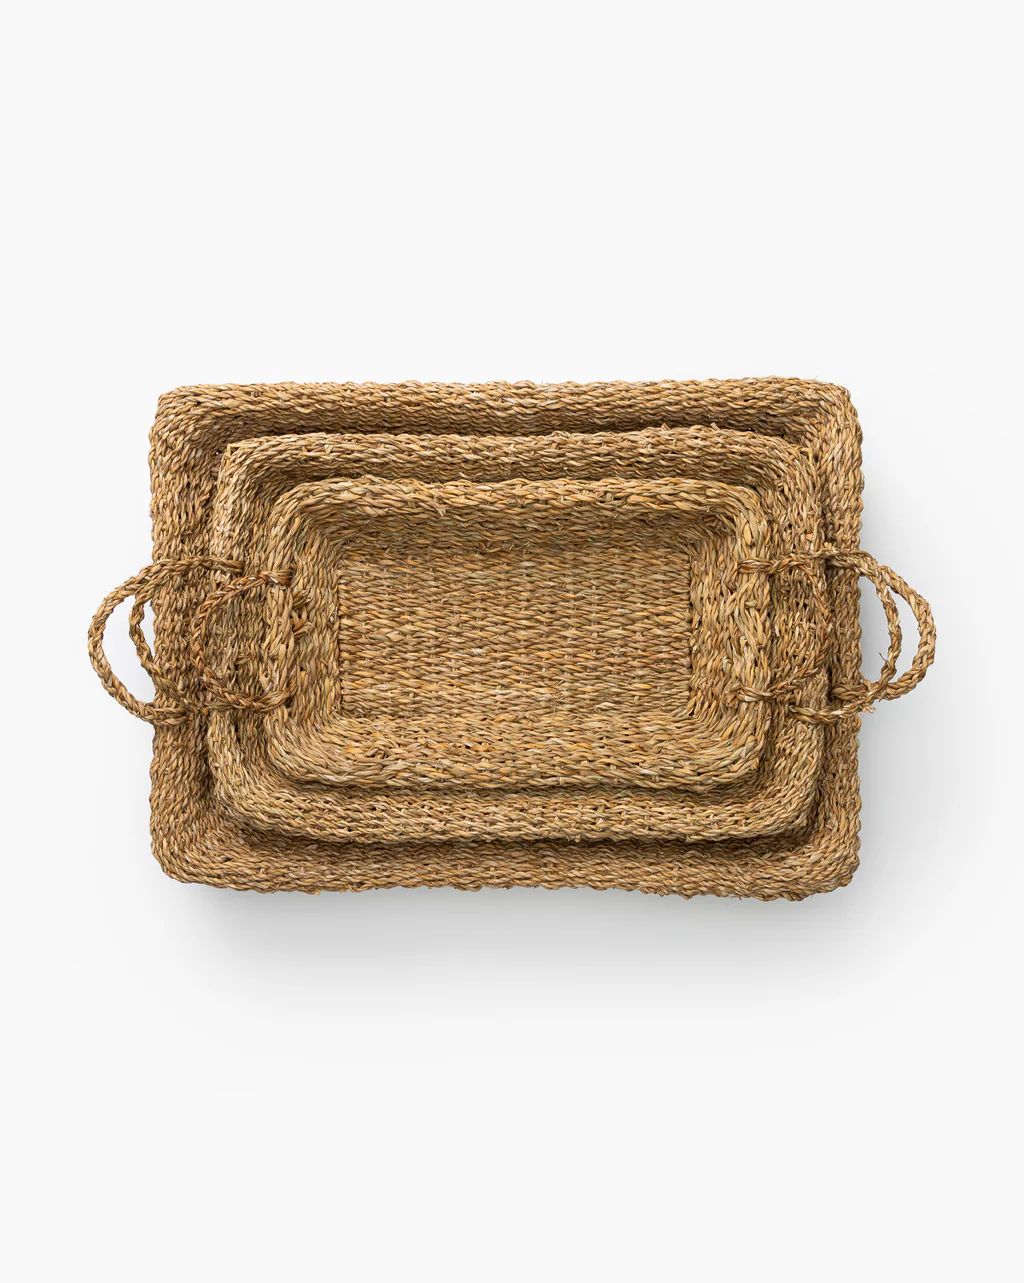 Seagrass Catch-All Basket | McGee & Co.